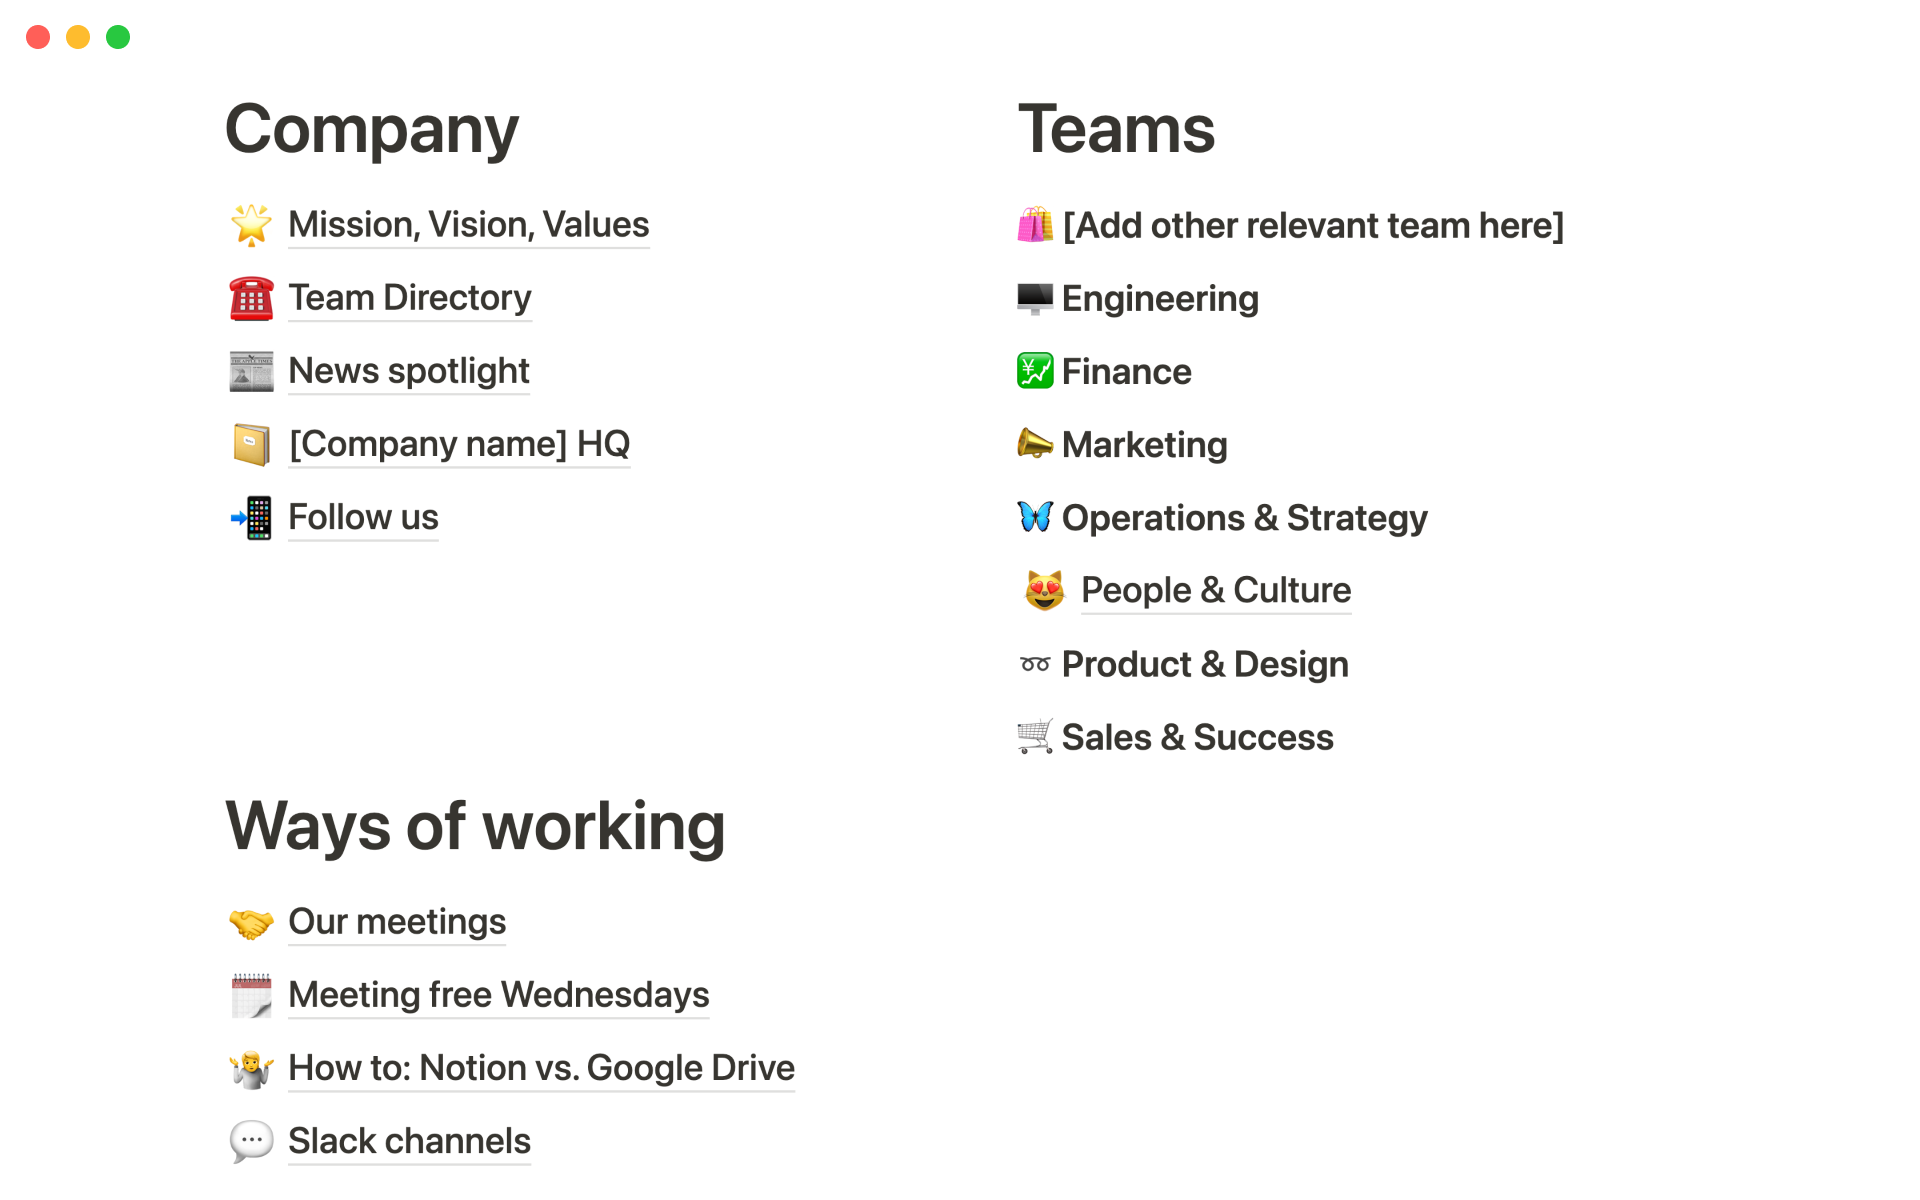 An internal company wiki for startups, covering company information, ways of working, and teams.